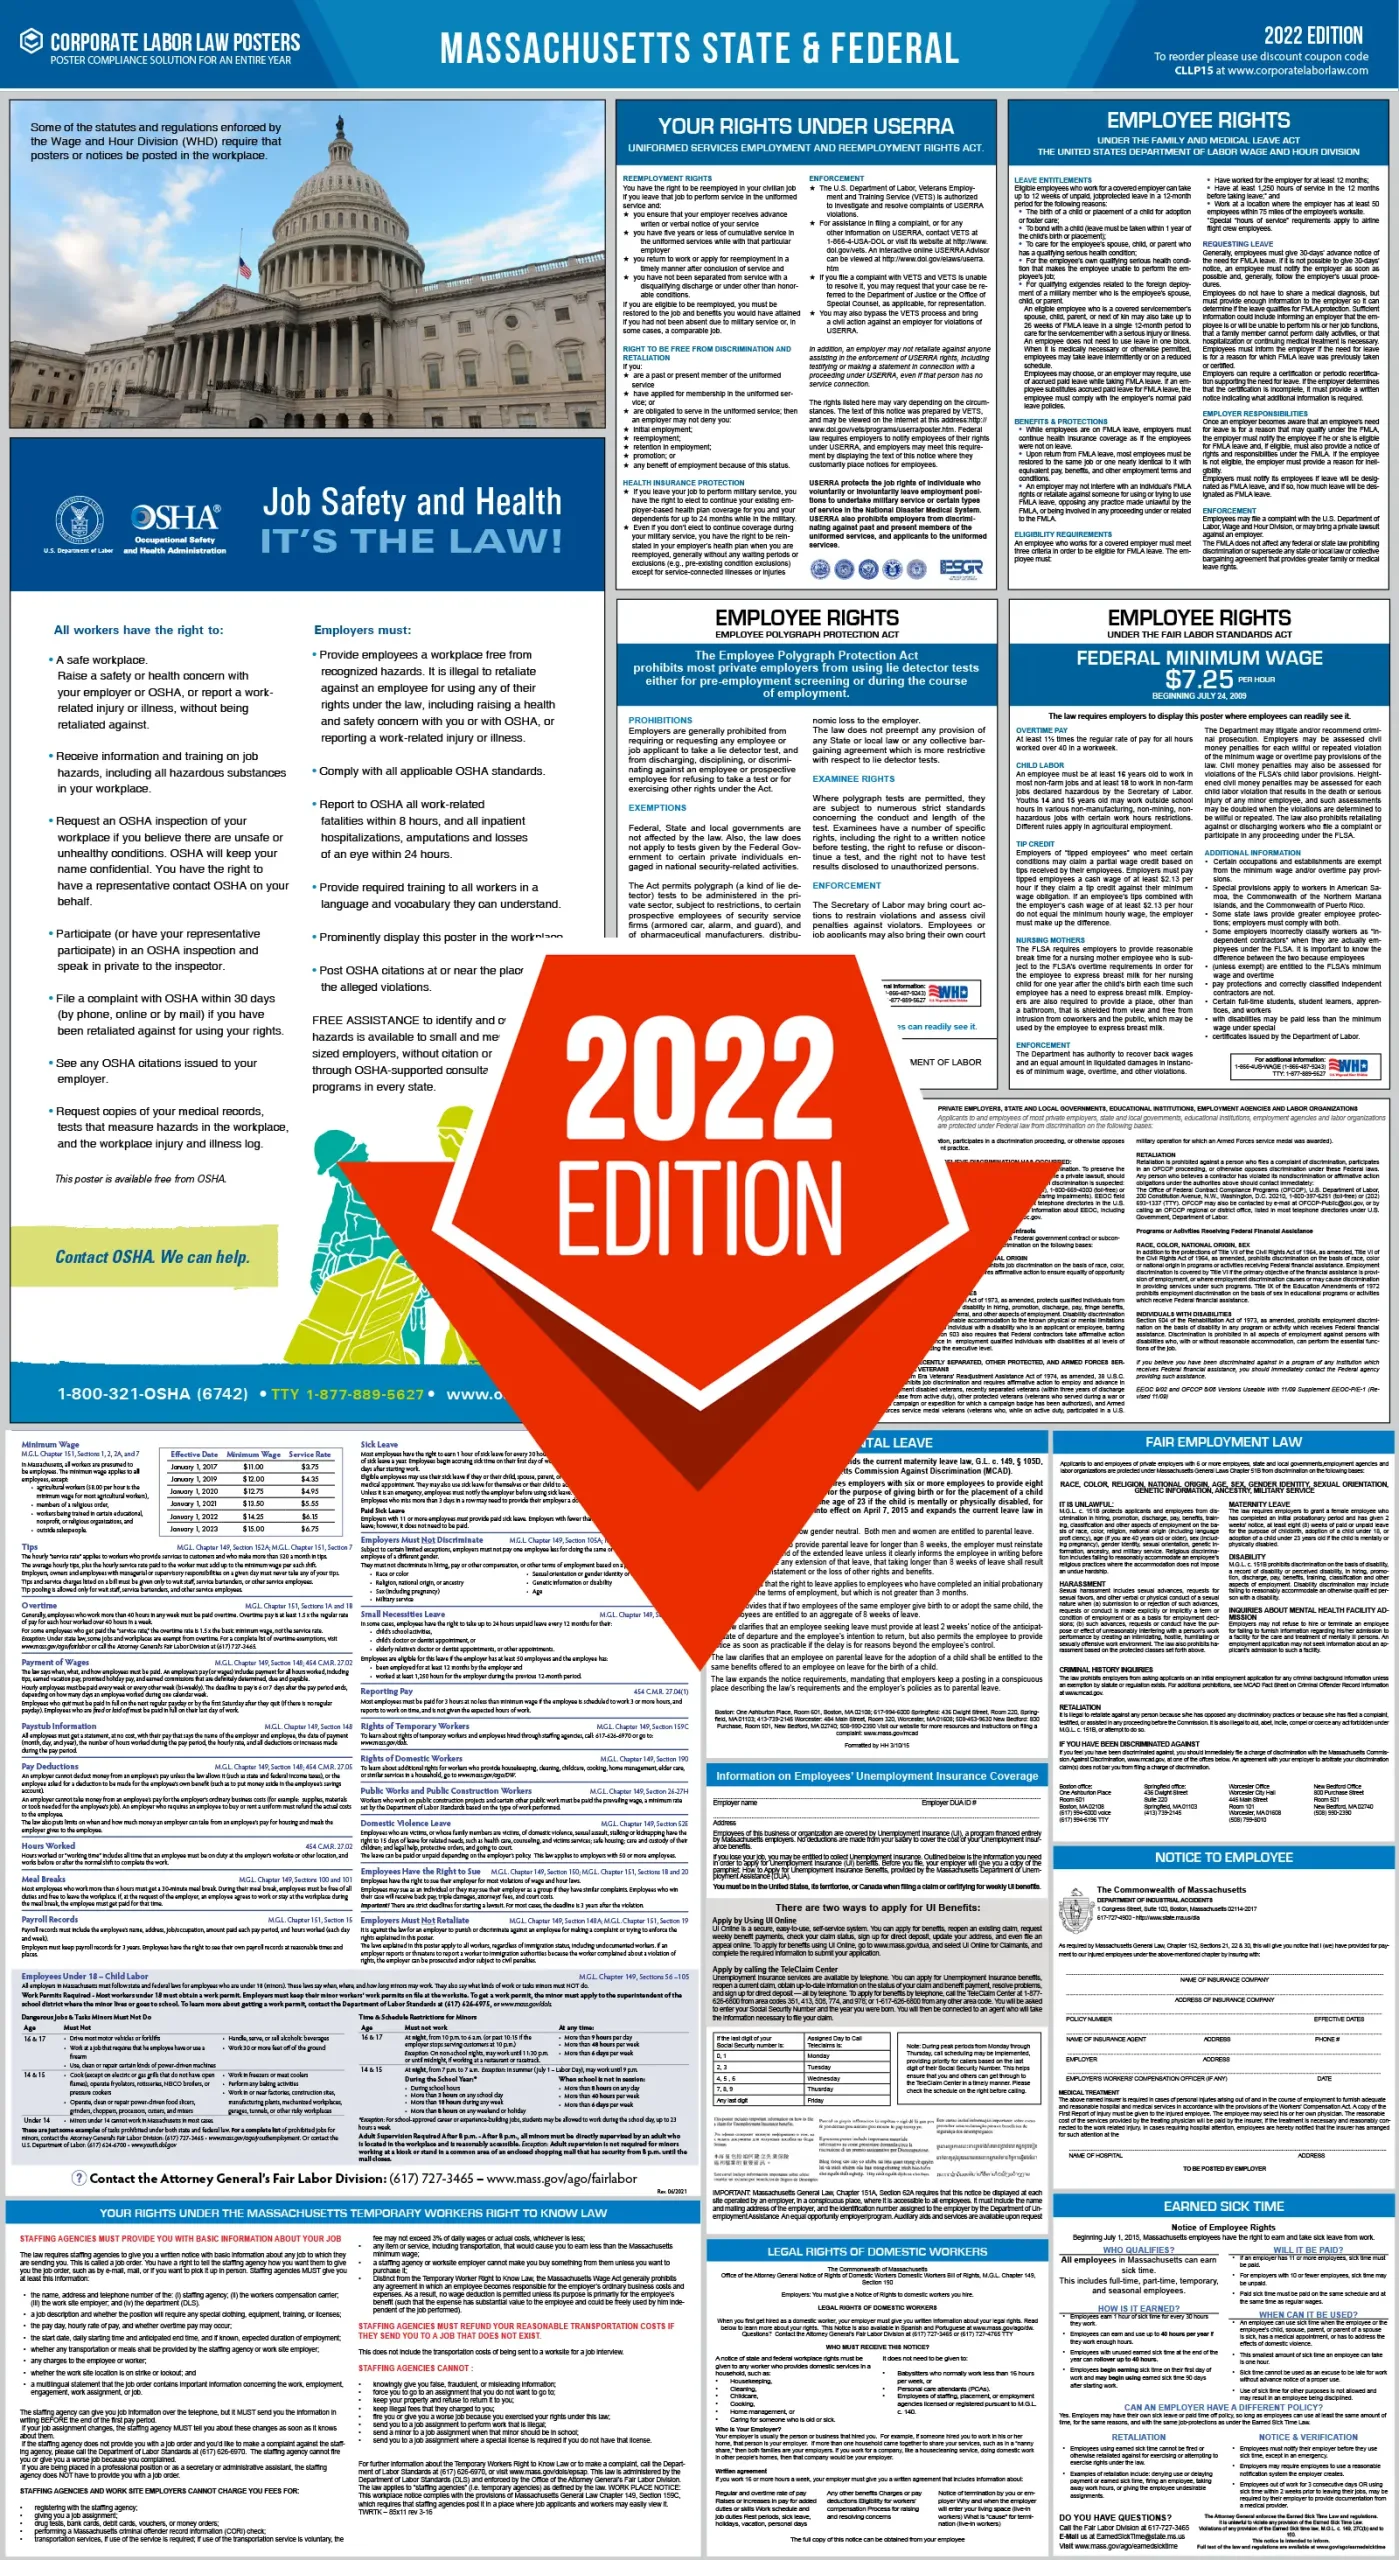 All-in-One OSHA Compliant NY State & Federal Laminated Poster for Workplace Compliance 26 x 40 English J 2019 New York Labor Law Poster J Keller & Associates 